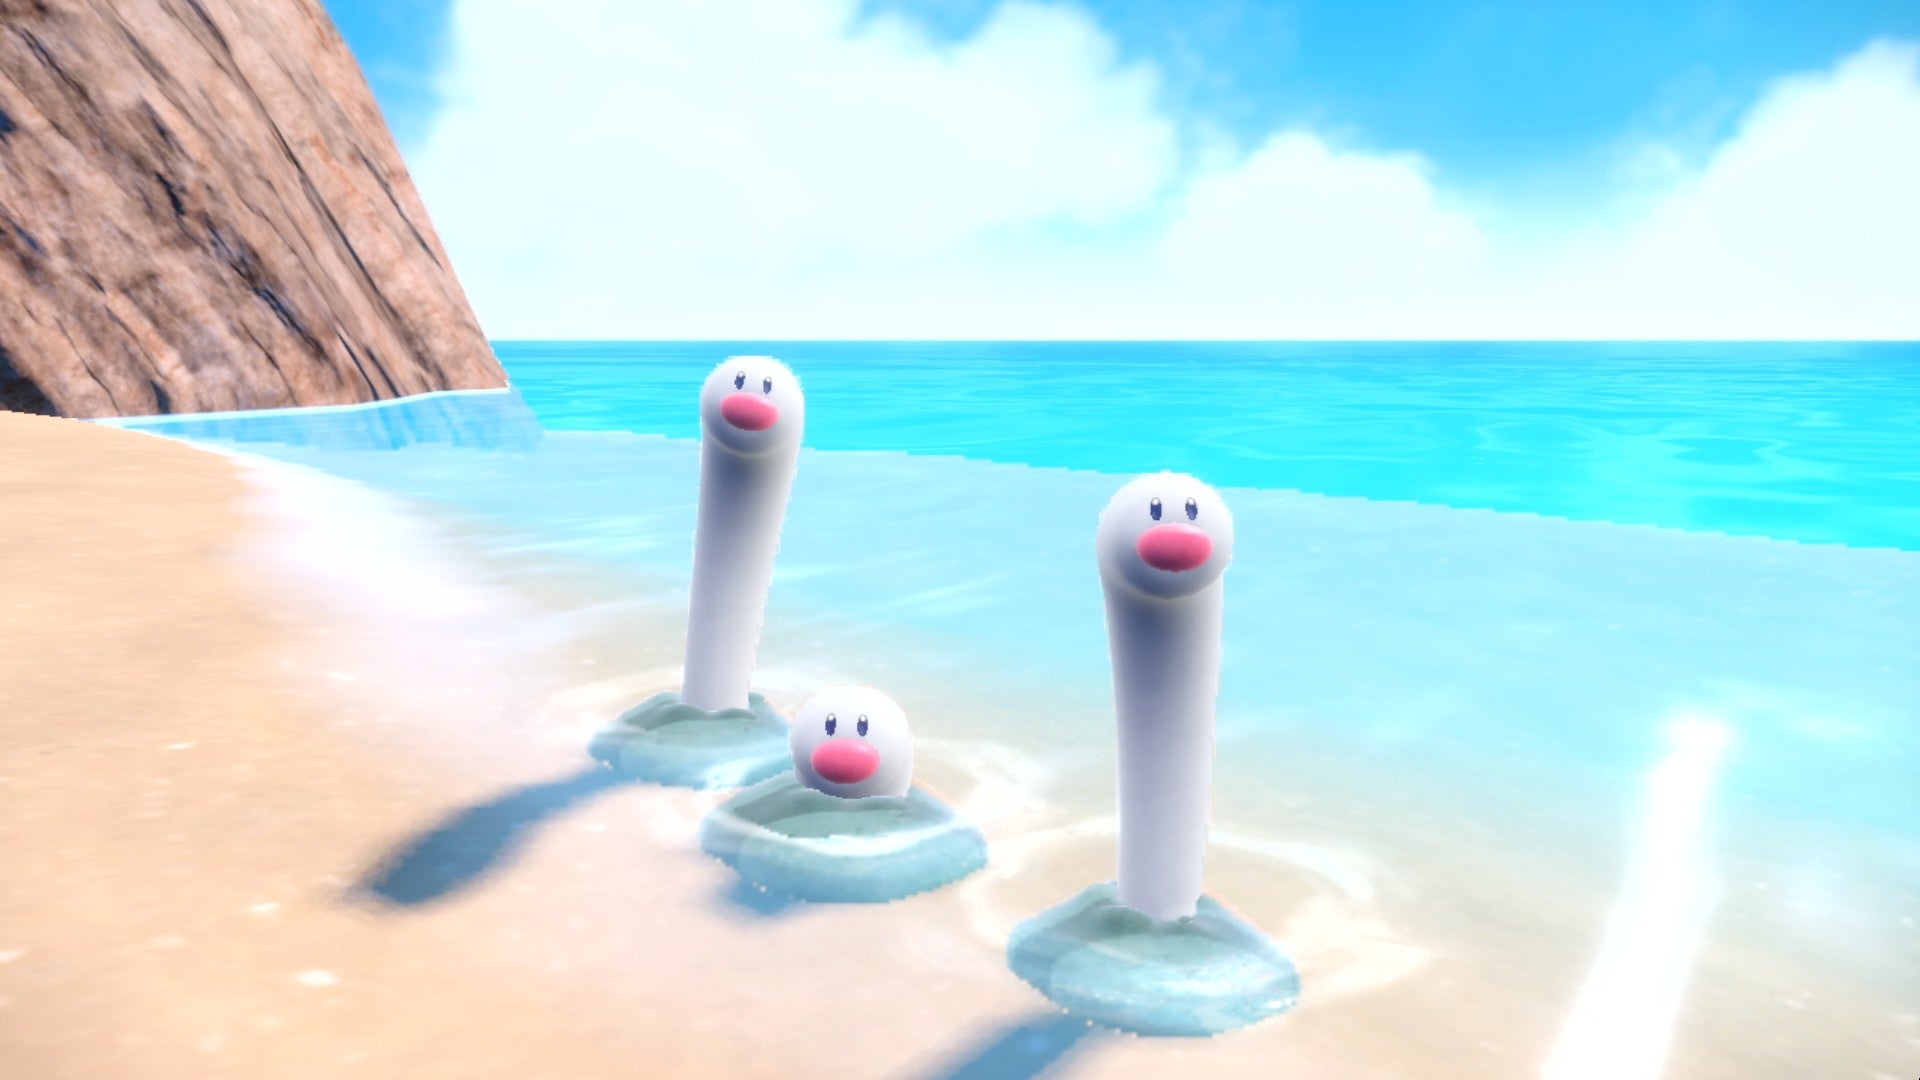 Pokemon Scarlet and Violet image showing three Wiglett along the coast of a sunny beach.